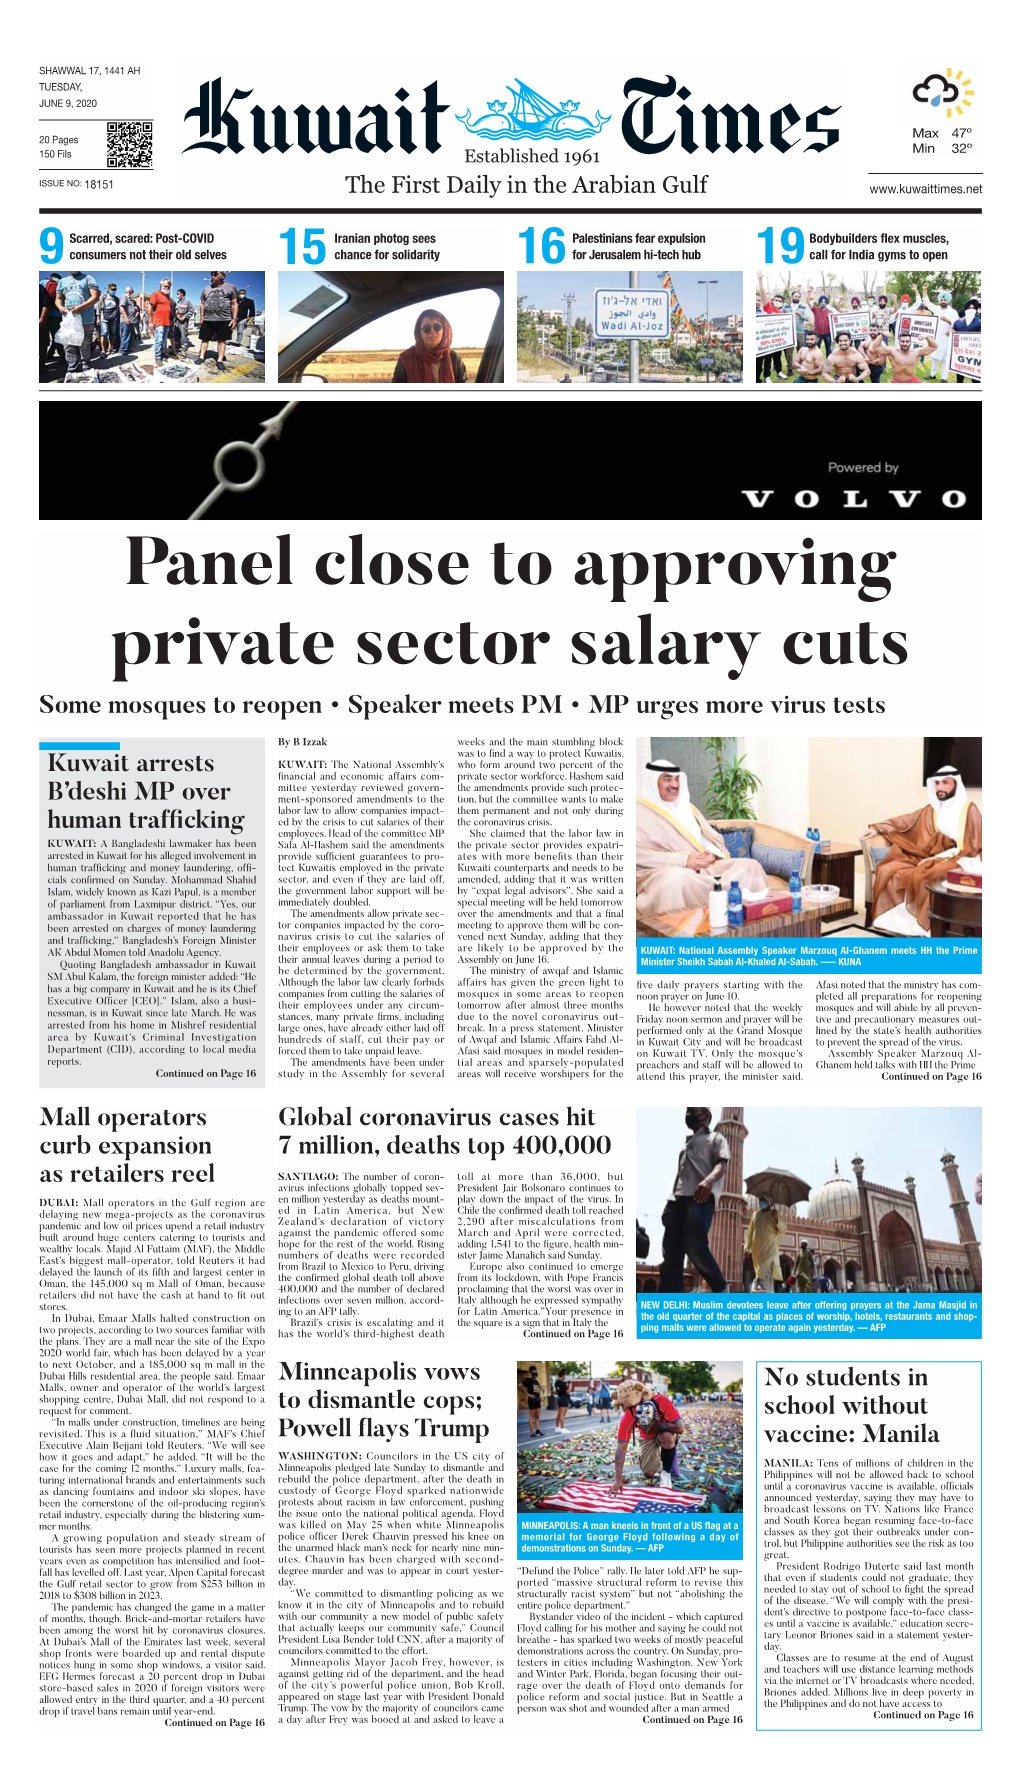 Panel Close to Approving Private Sector Salary Cuts Some Mosques to Reopen • Speaker Meets PM • MP Urges More Virus Tests